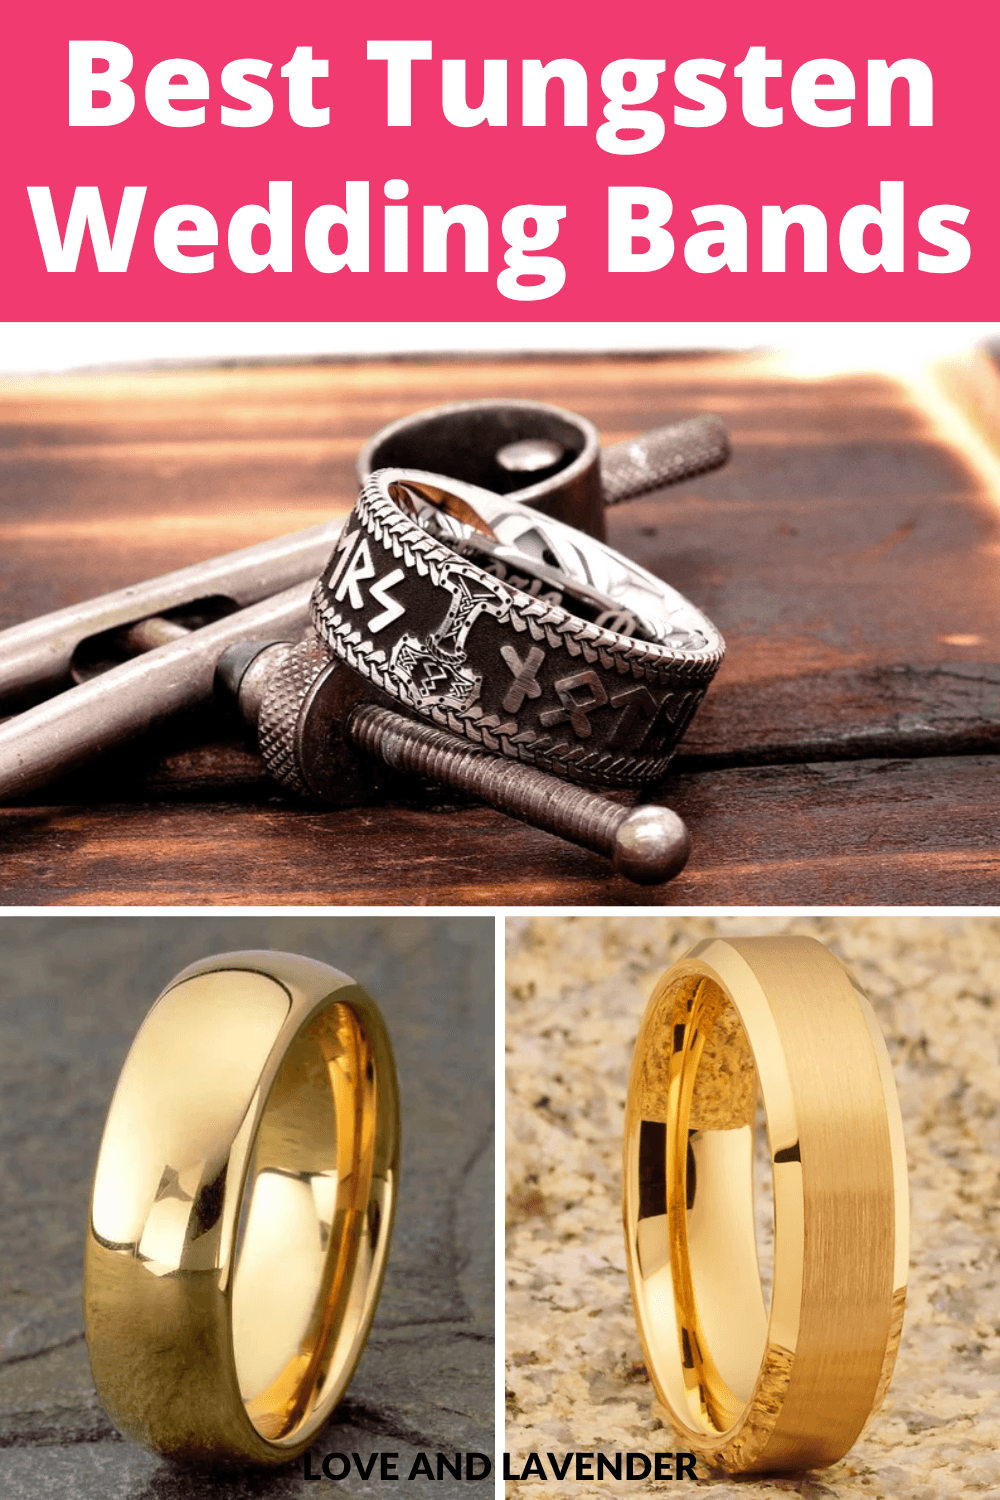 When we think of crazy, no-nonsense tools for life, tungsten rings probably aren’t the first thing that comes to mind. That’s because these rings are surprisingly customizable and utterly awesome. They don’t just look good, their chemical composition is badass too! Check out the blog post to see our top favorites!